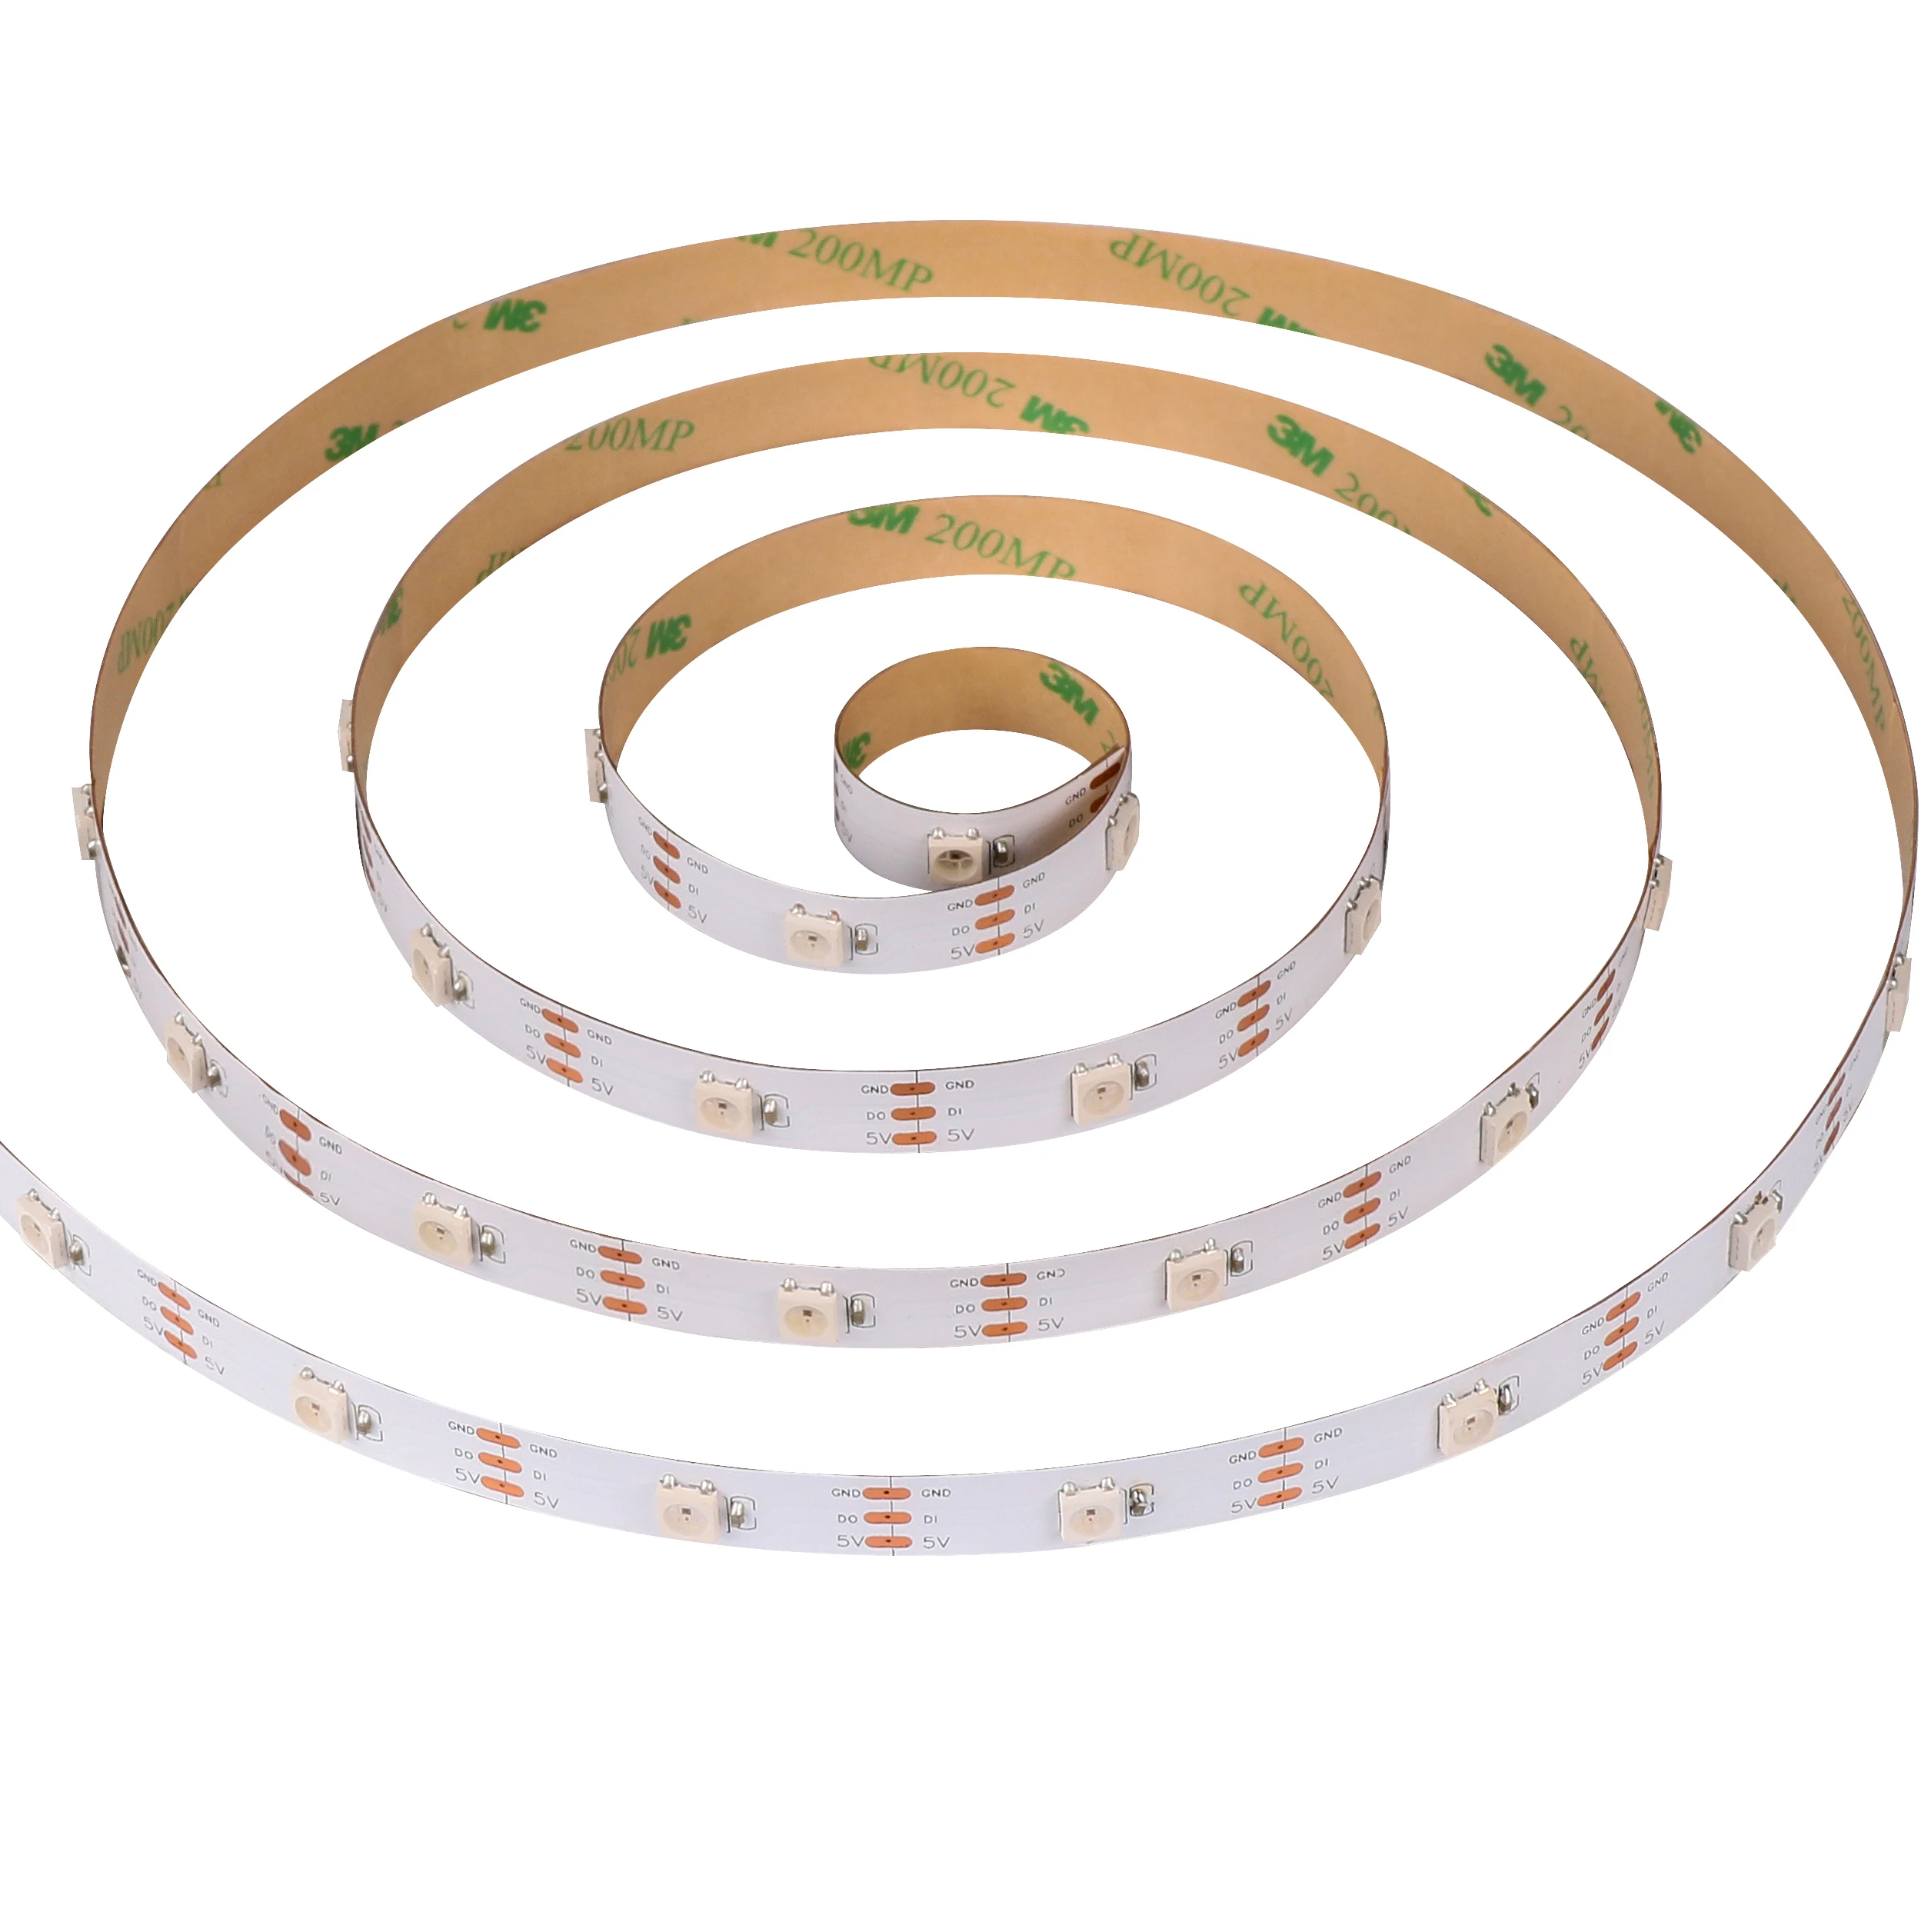 RGB Colour changing LED Strip Light retail pack project business IP20 IP54 IP65 IP68 Silicone Glue Waterproof